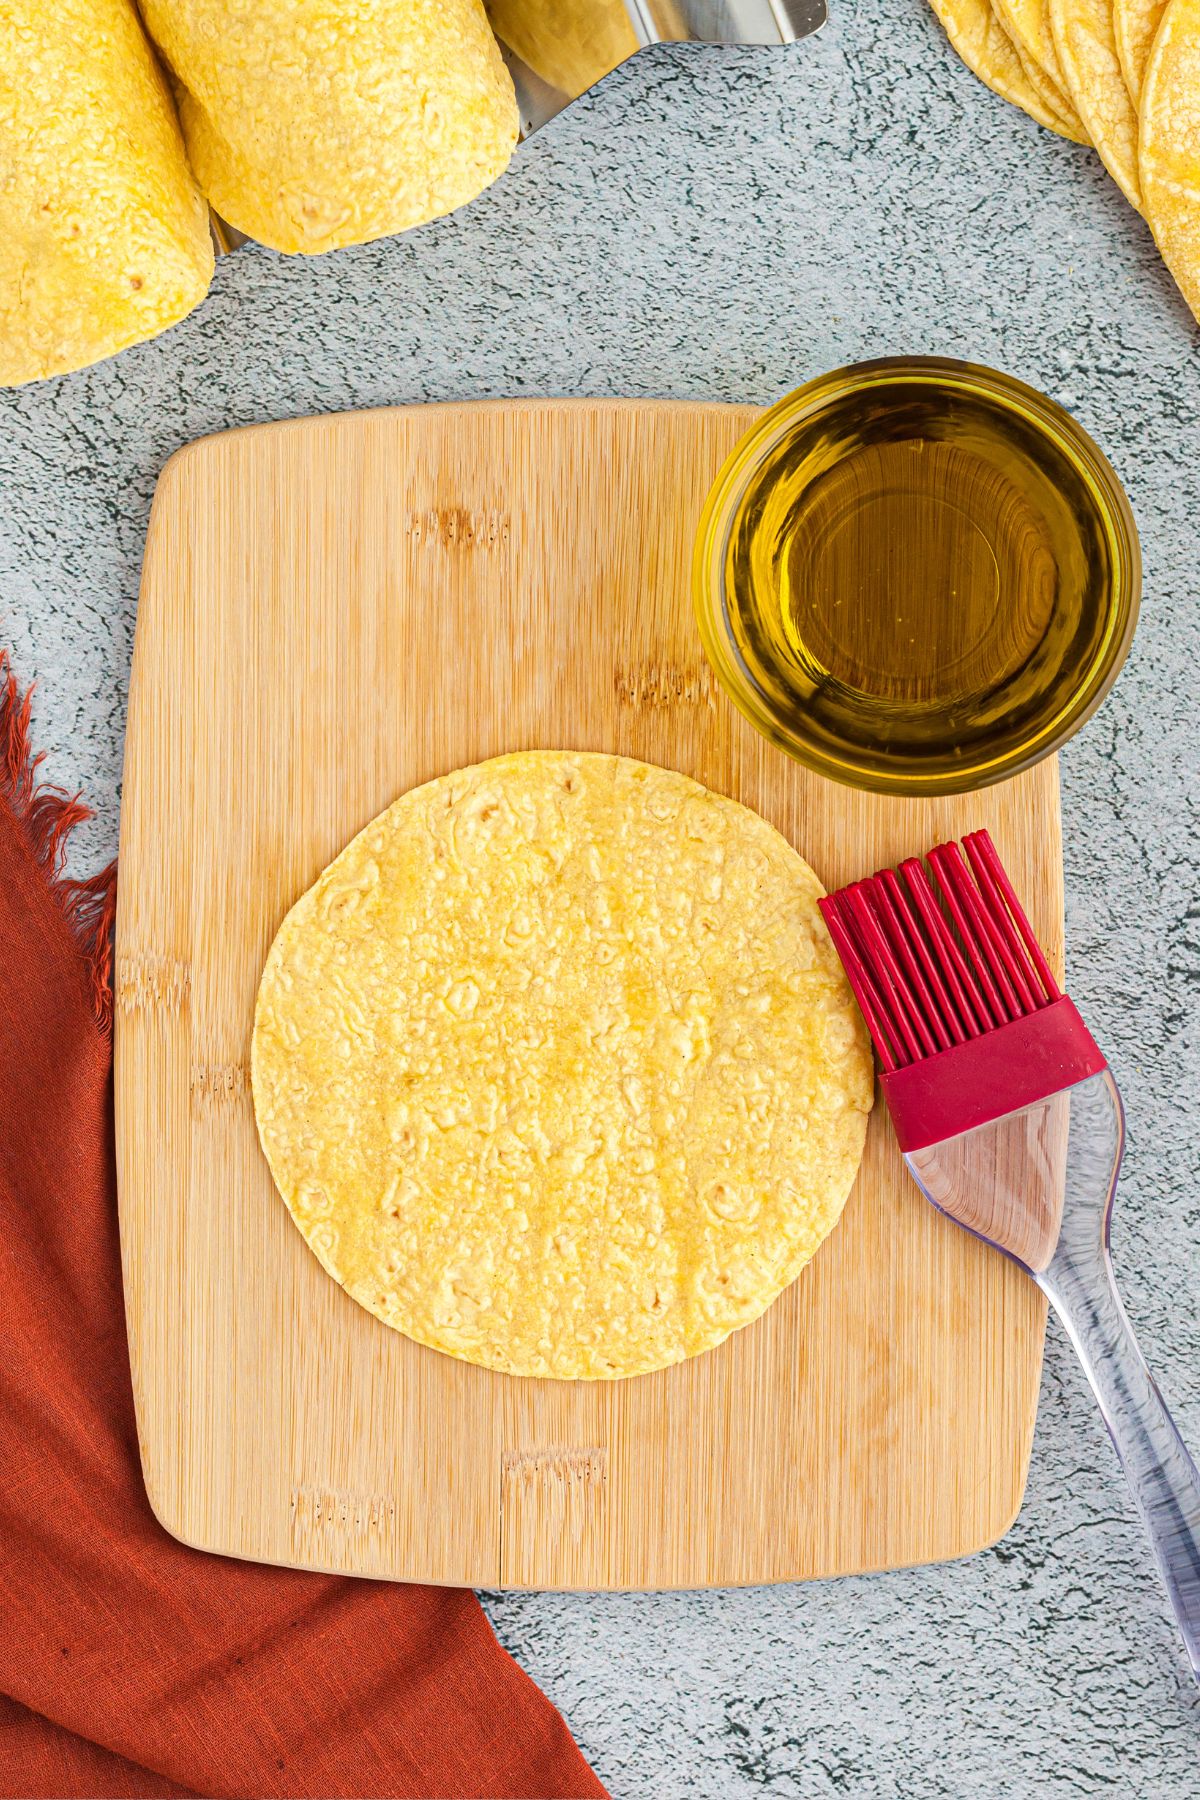 Brushing oil on tortillas and then draping over mold or foil to shape